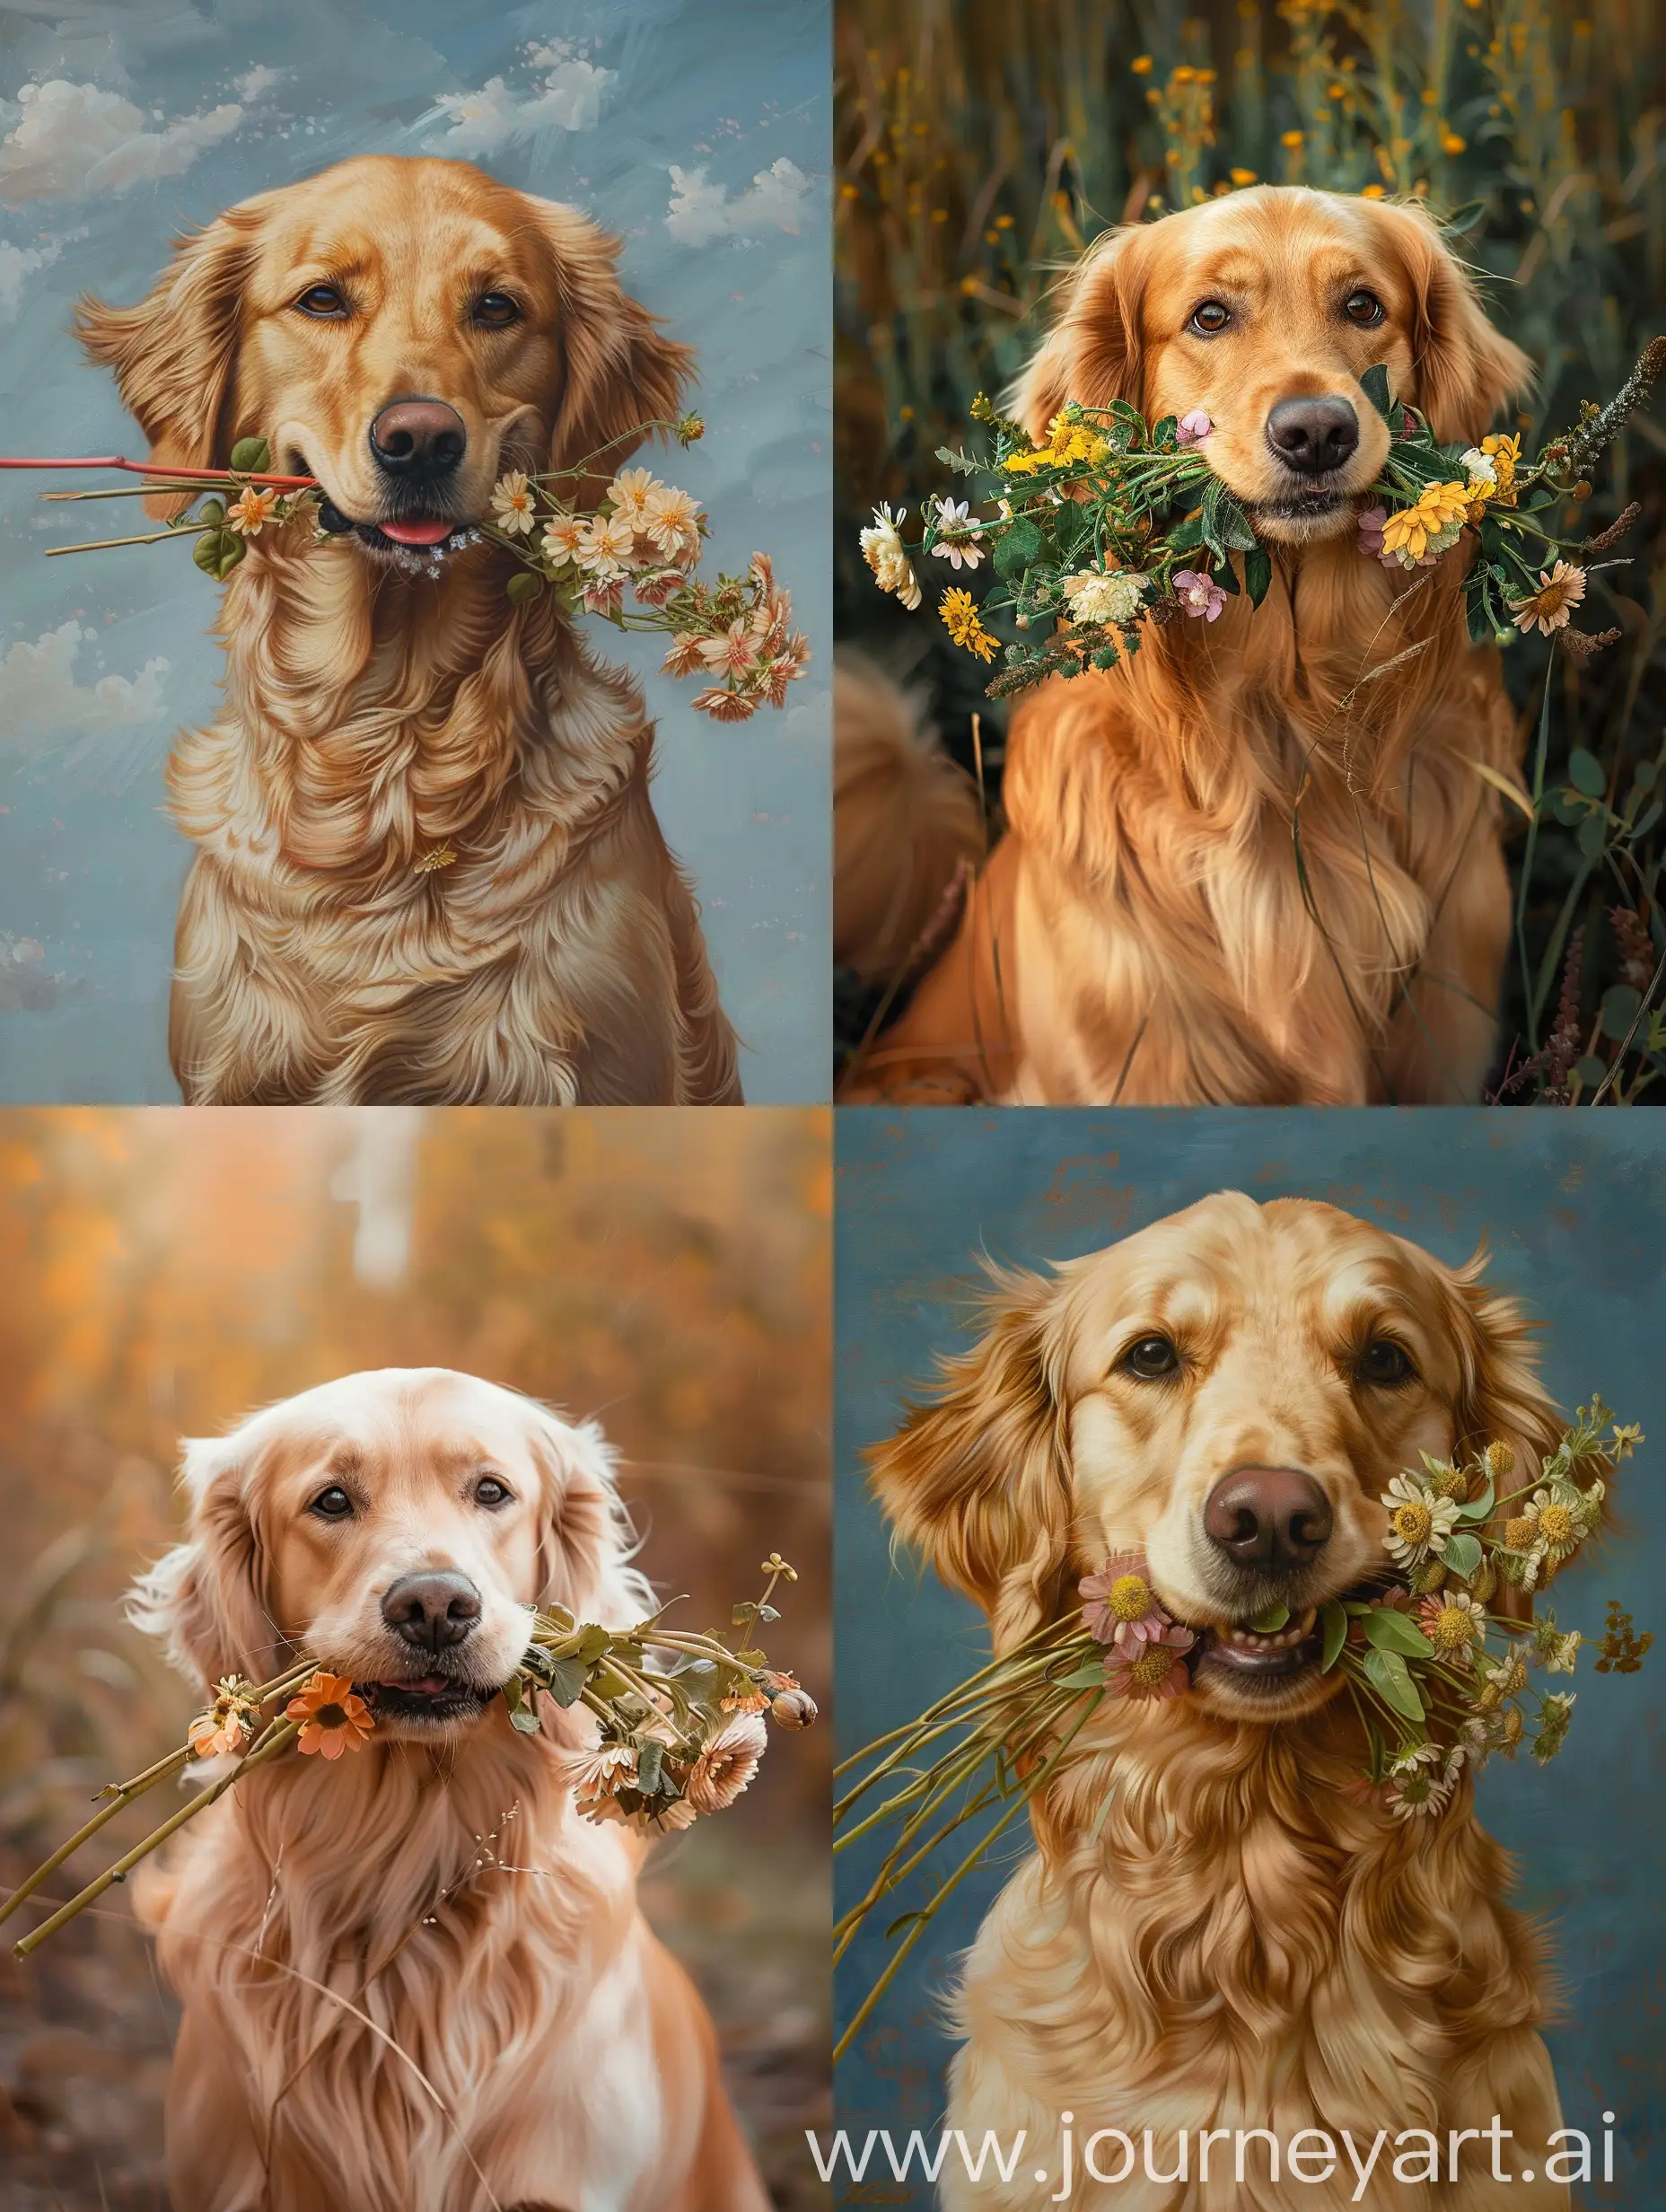 Golden dog with flowers in her mouth